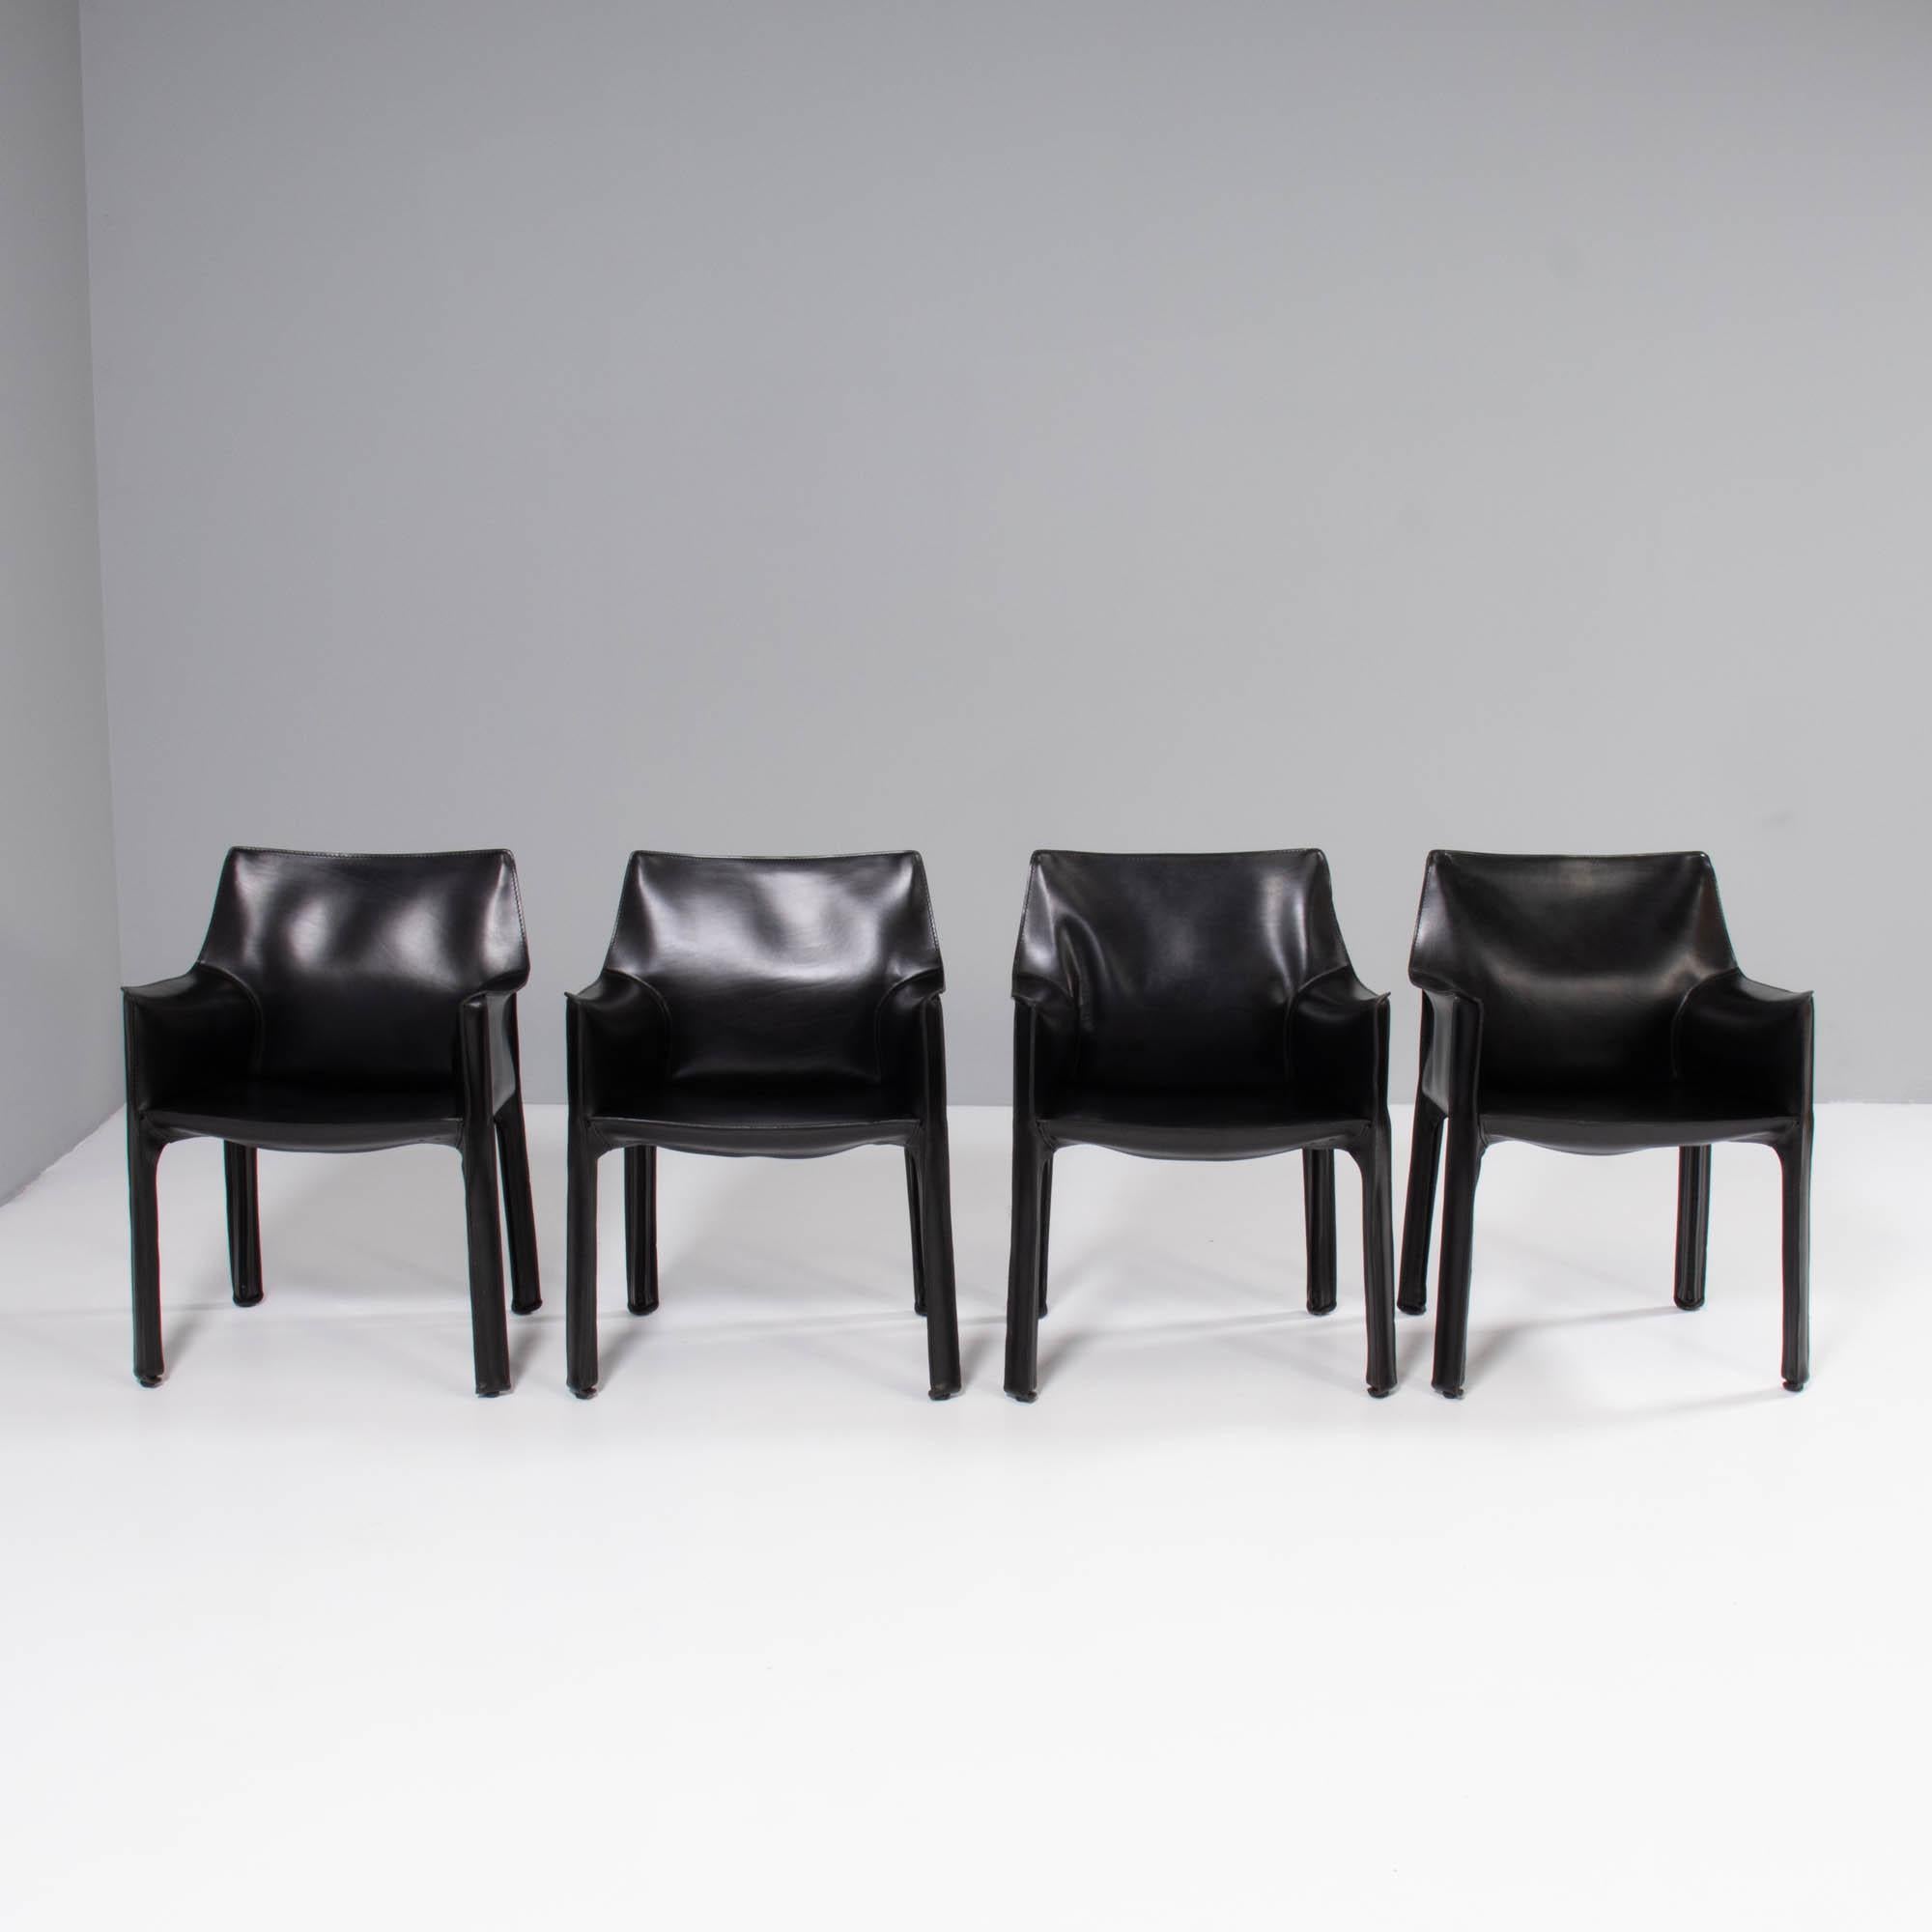 Designed by Mario Bellini in 1977, the Cab dining chairs have since become a signature piece in the Cassina furniture collection.

These original 1970s dining chairs are constructed from a steel frame and are covered in black leather upholstery,